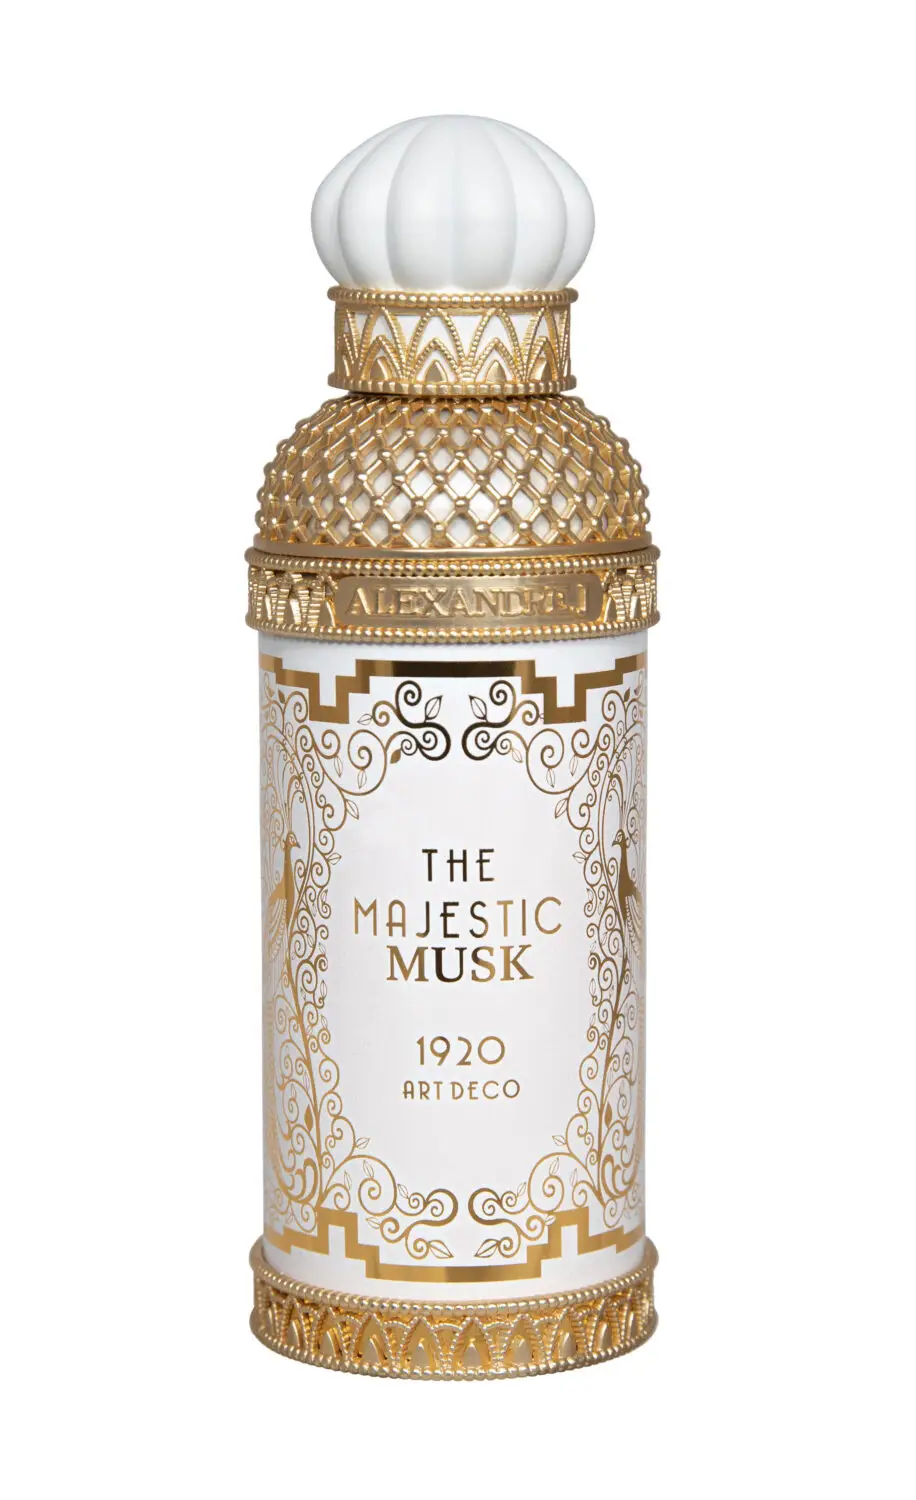 The Majestic Musk 